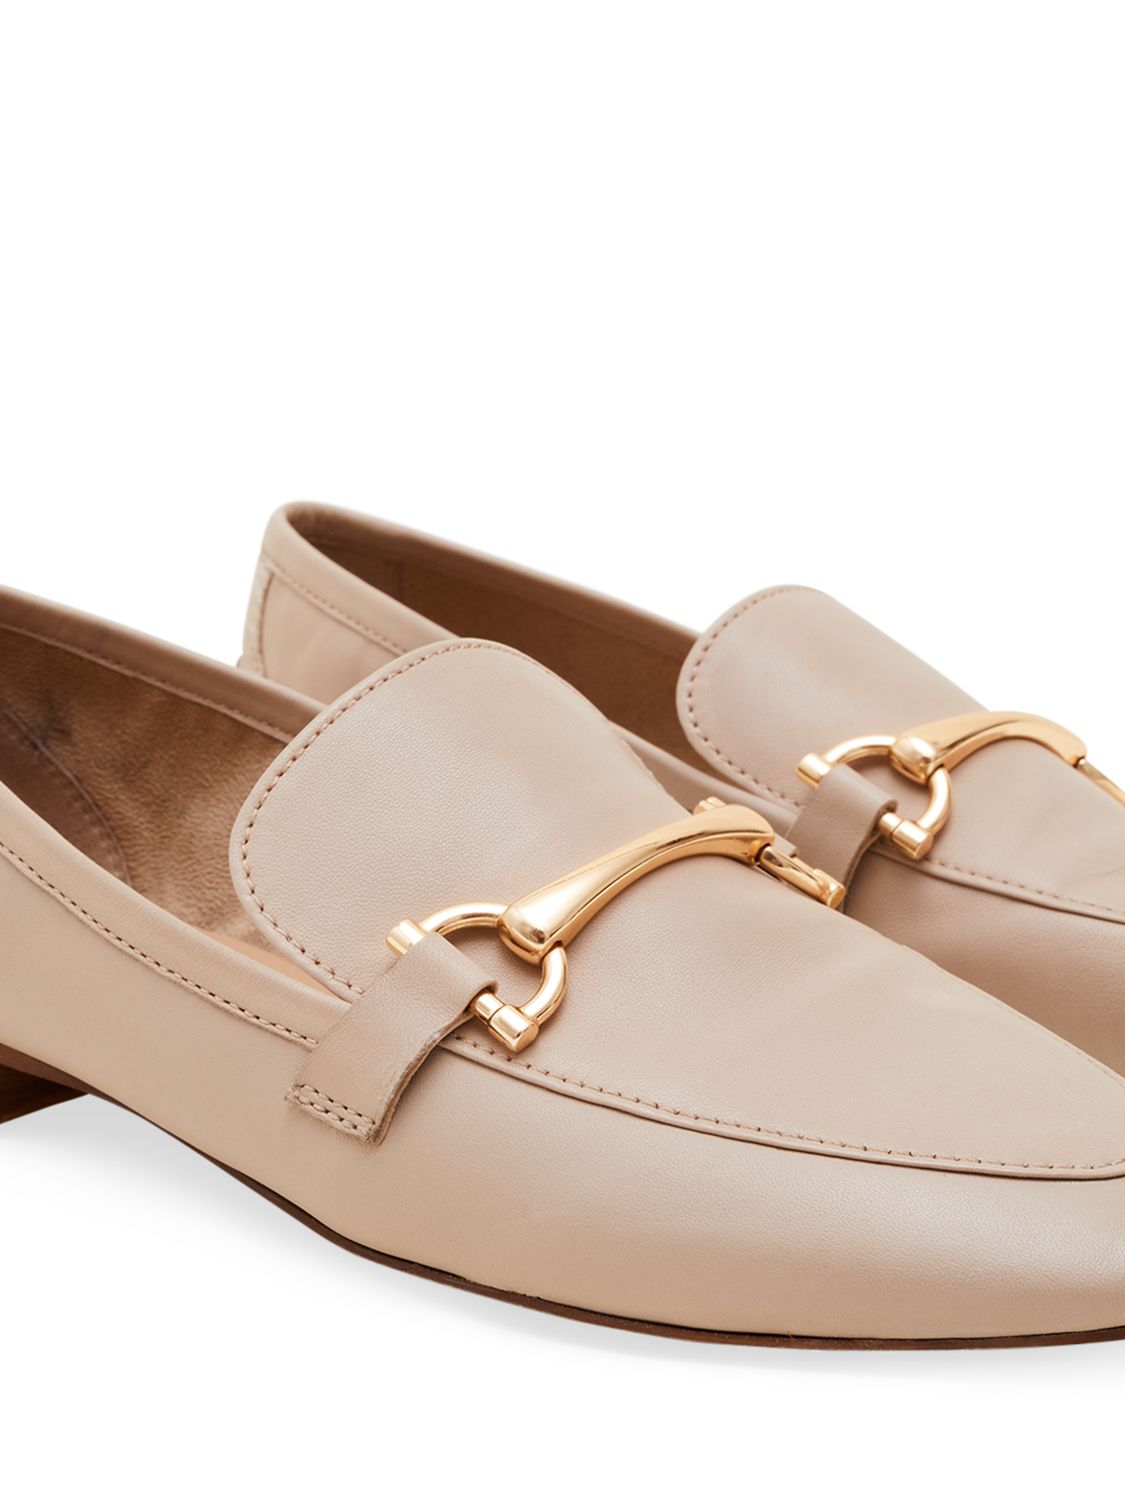 Buy Phase Eight T-Bar Leather Loafers Online at johnlewis.com